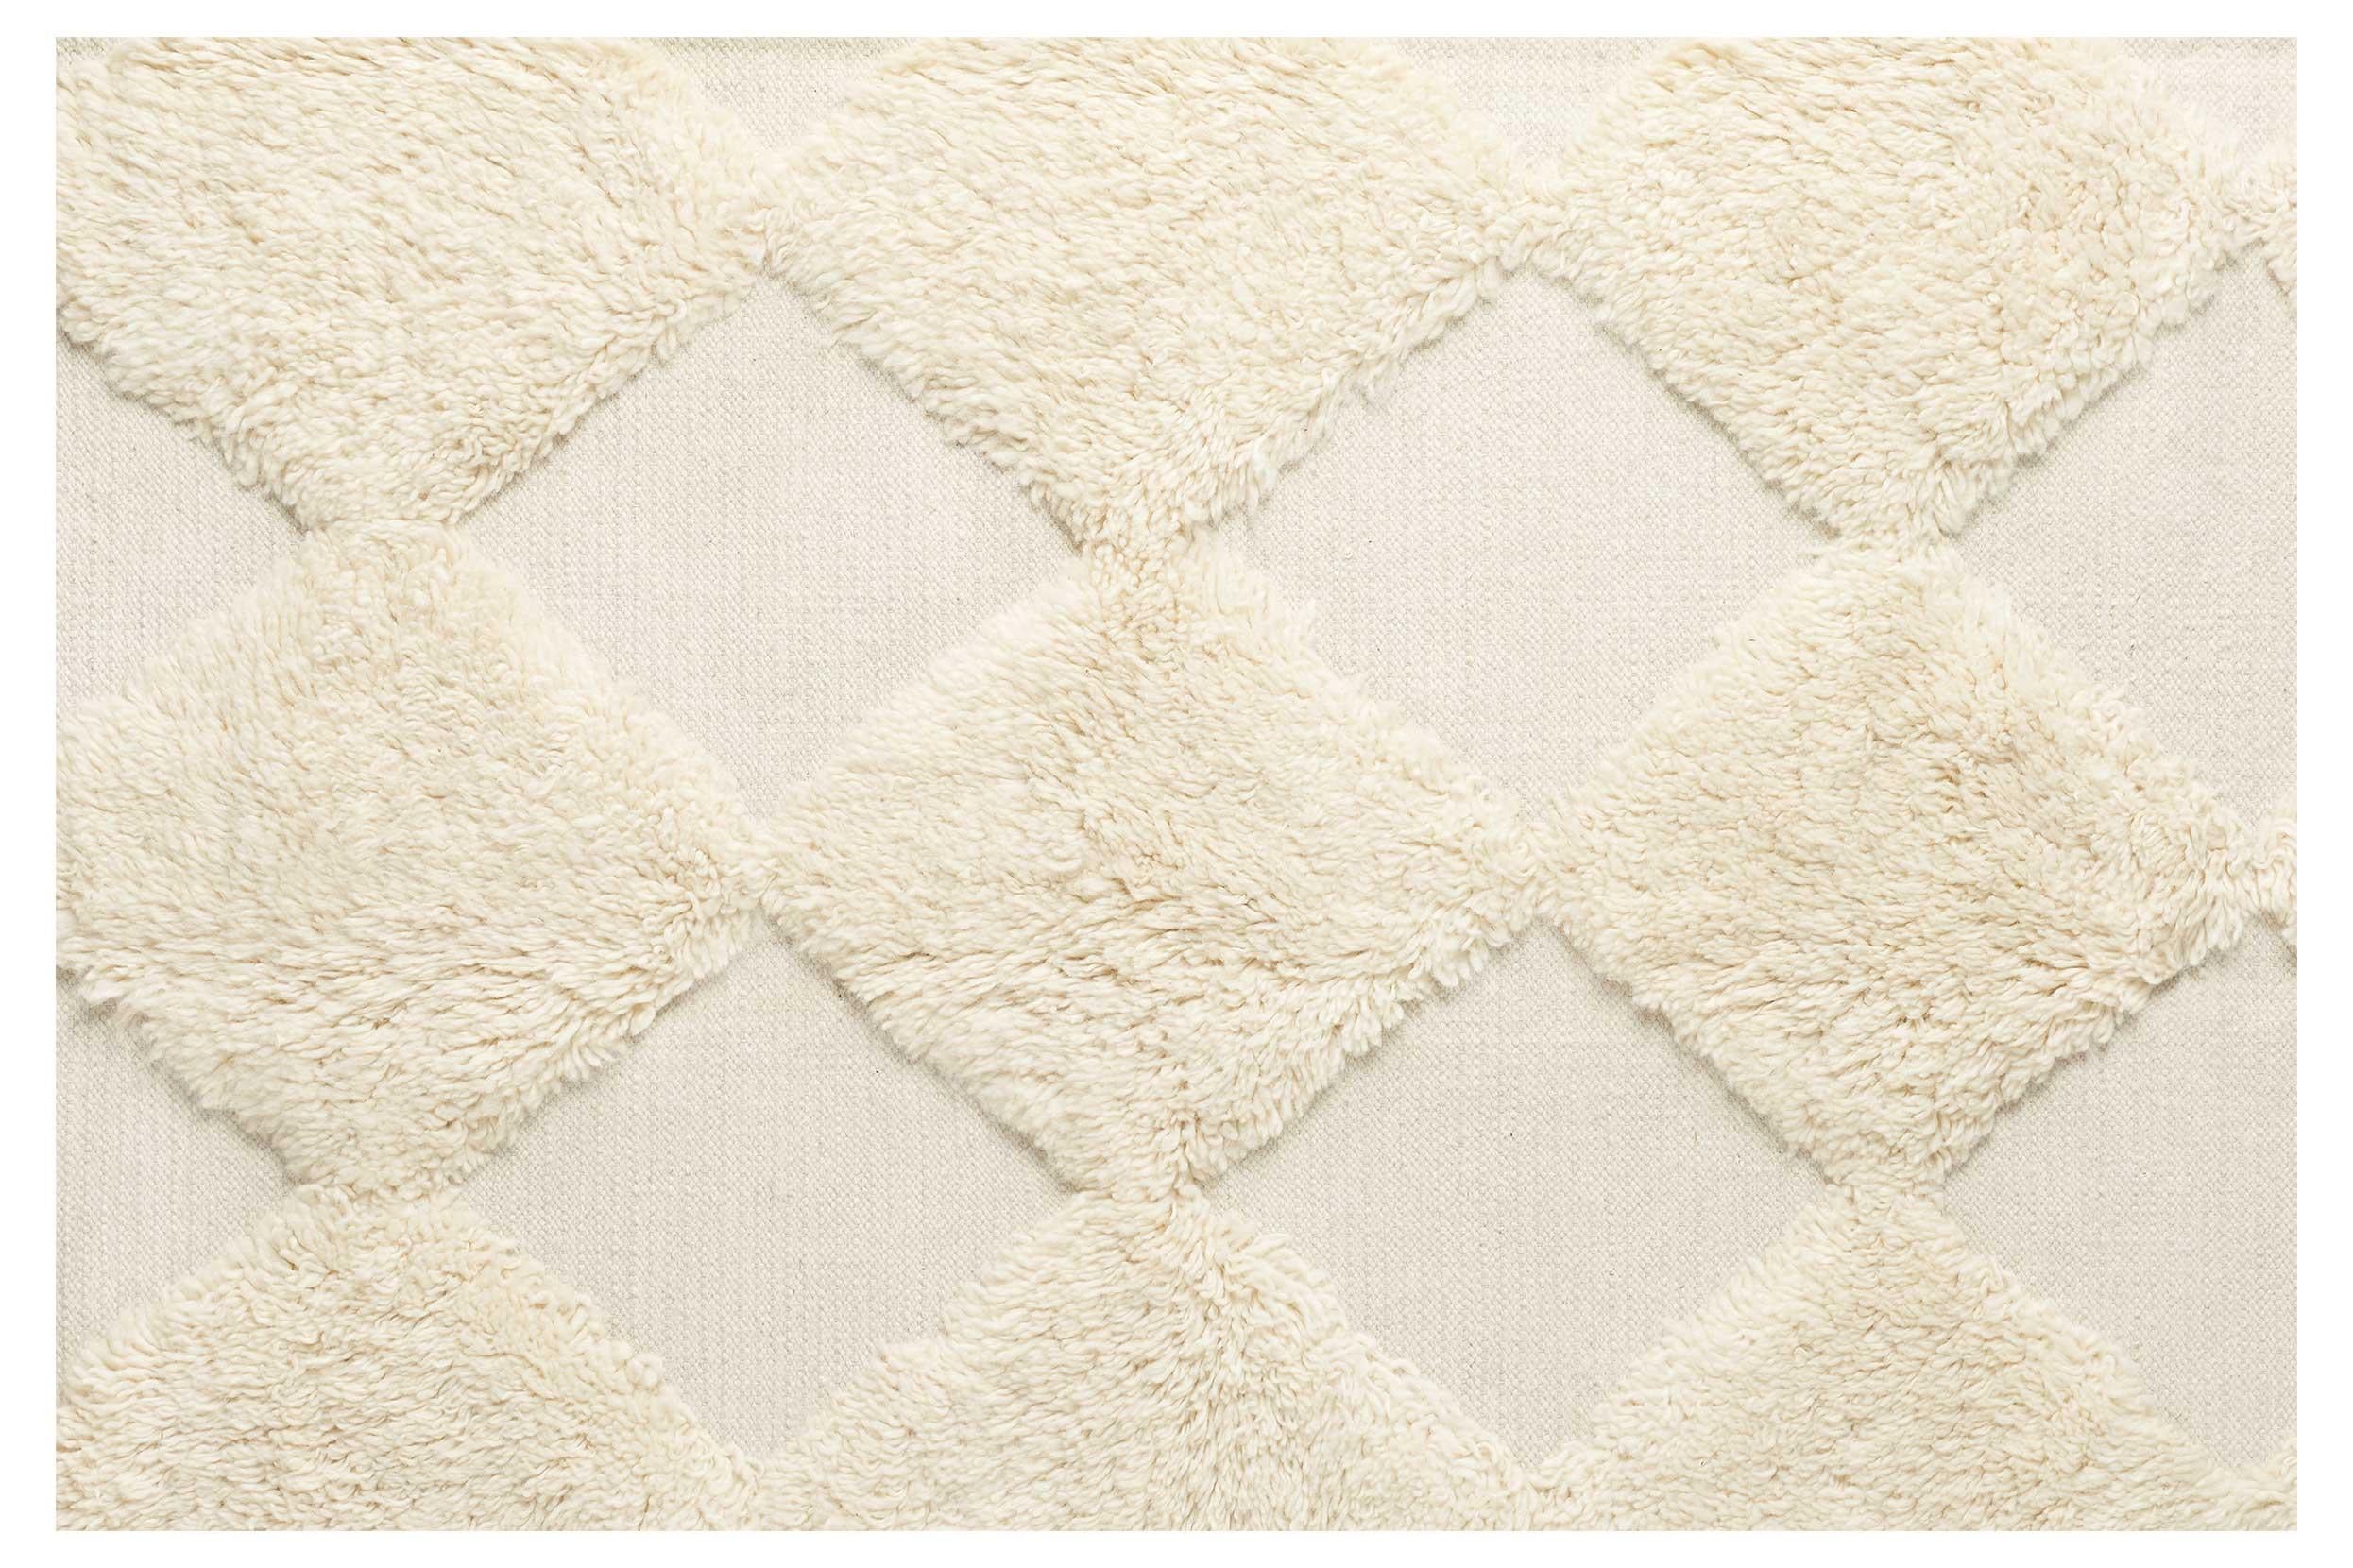 Chess Rya rug is hand woven and made of 100% wool and has a unique pattern as some parts of the rug are flat weave and some parts a shaggy pile and gets a unique look with Its high and low effect. Available in White and Grey. 

Material: Hand